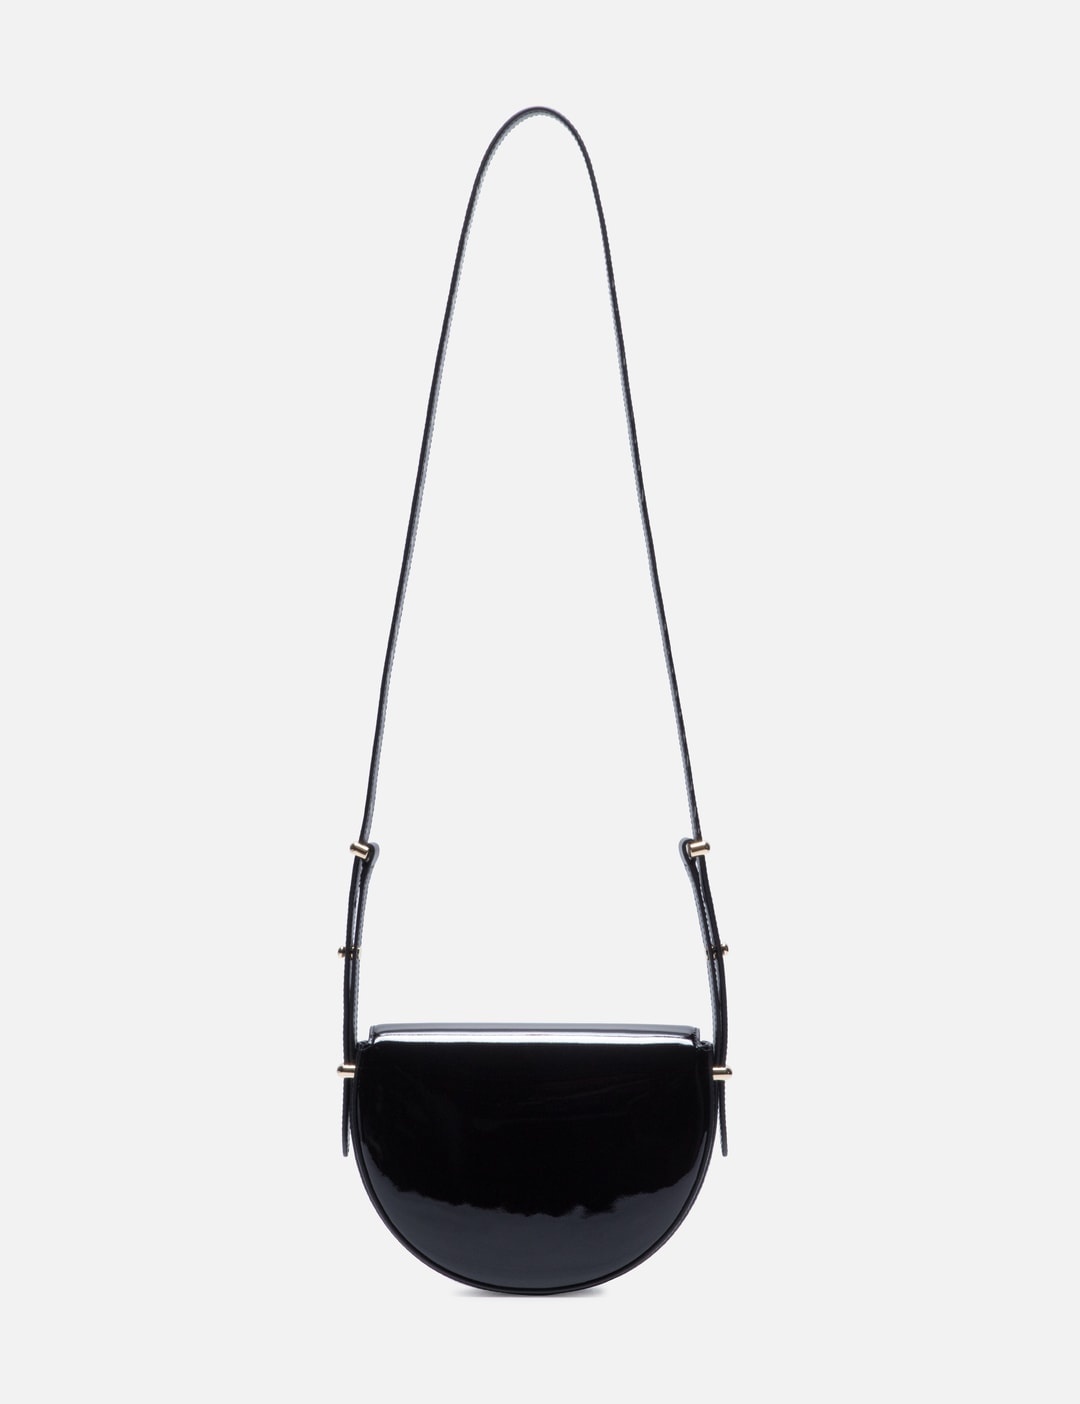 PATENT LEATHER BAG - 4